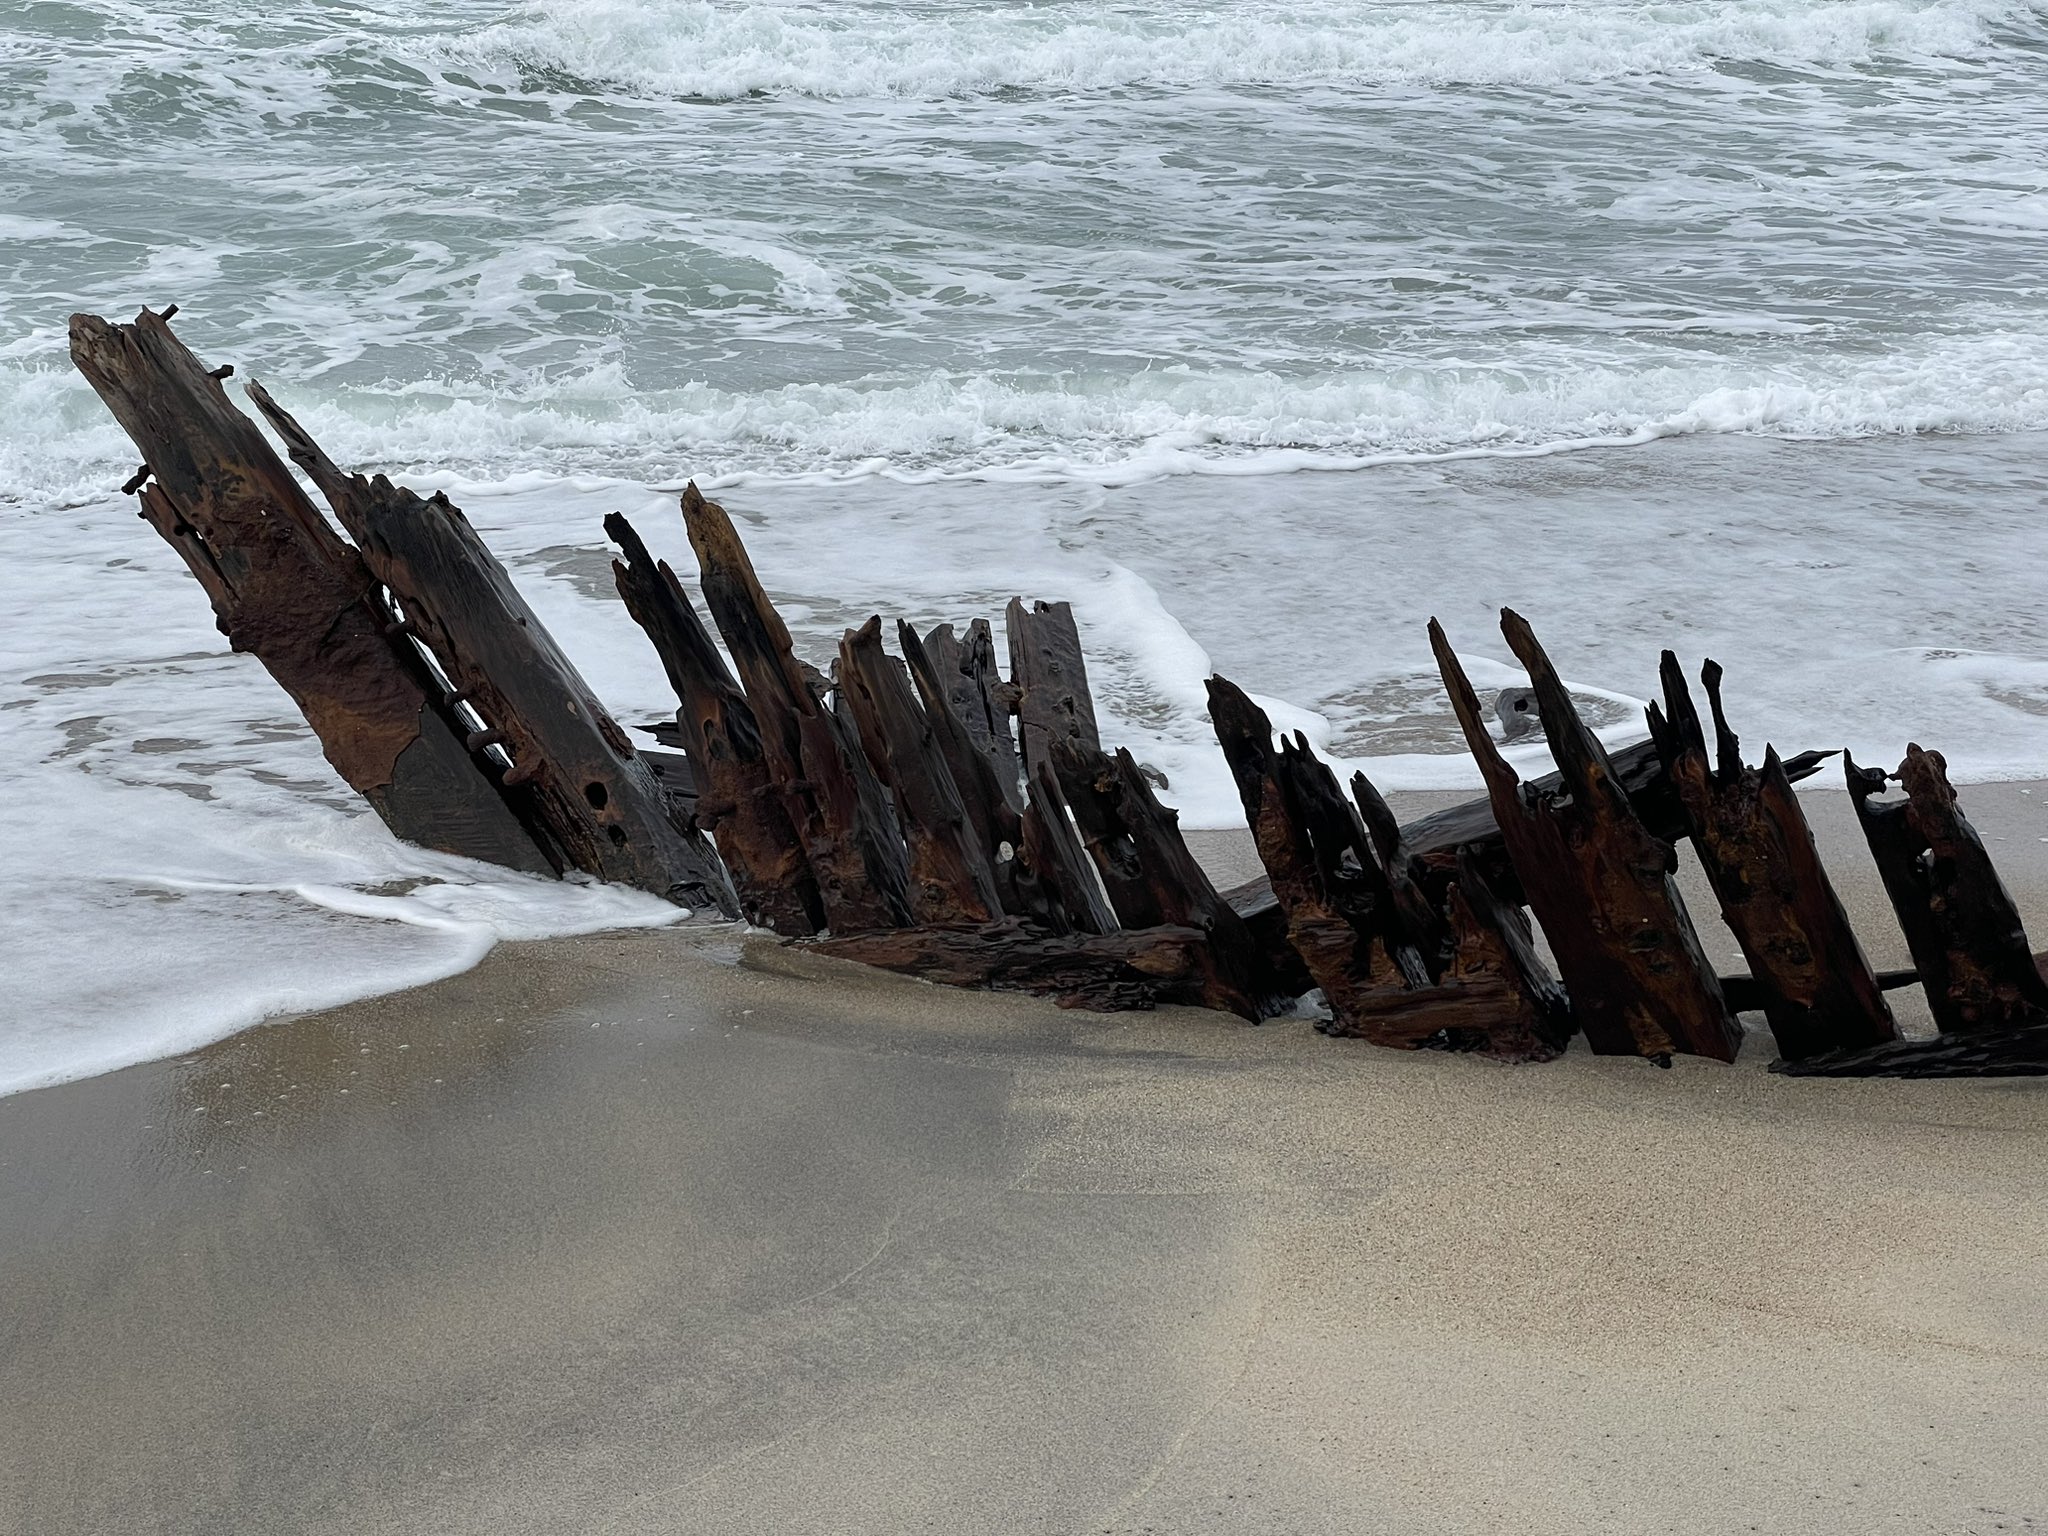 Shipwreck unearthed on Nantucket shore likely a 100-year-old schooner